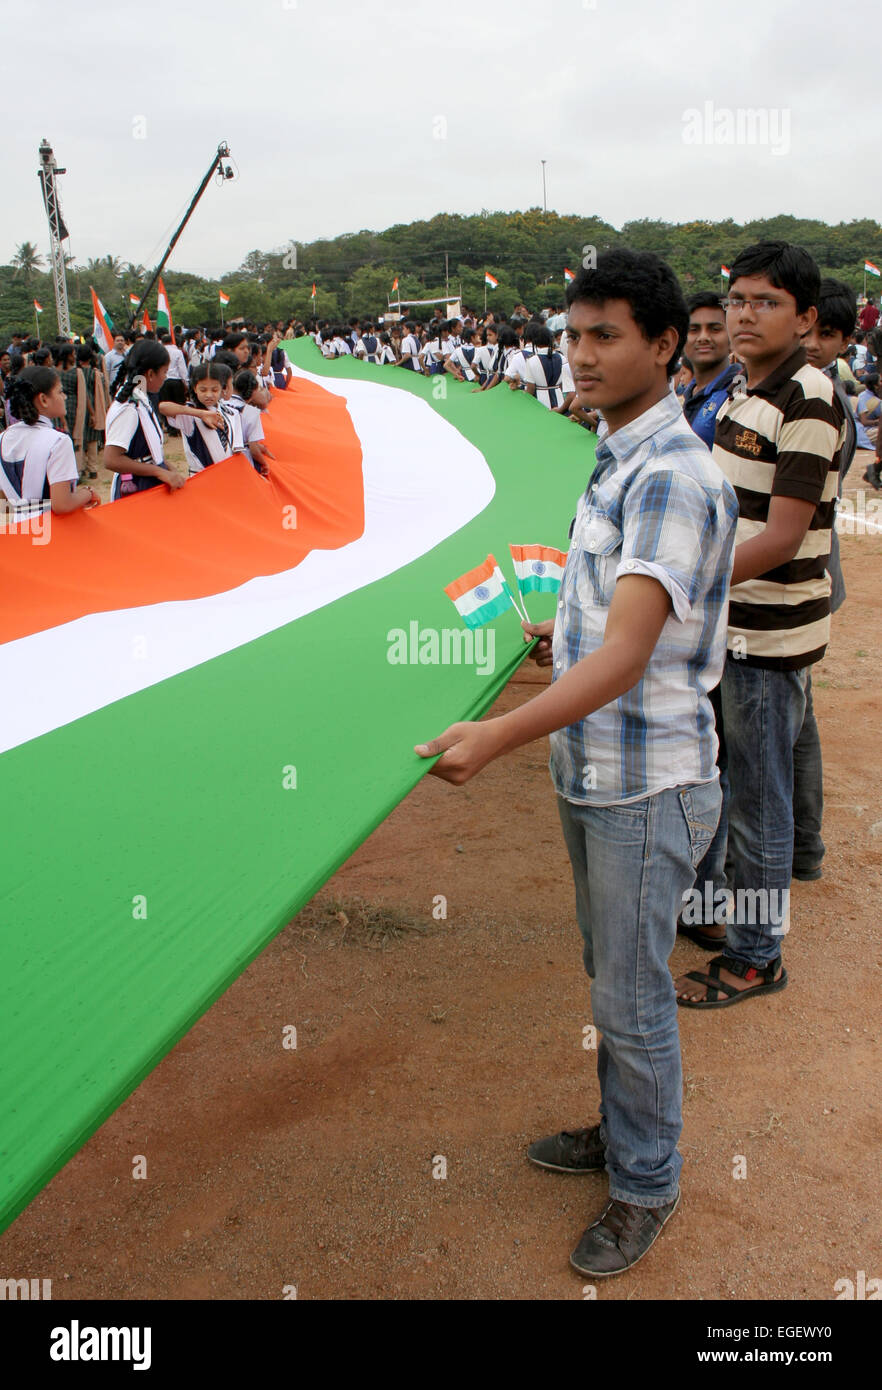 Indian School Children assemble with a long National flag at NTR Stadium in Hyderabad,India on Tuesday August 28,2012. Stock Photo